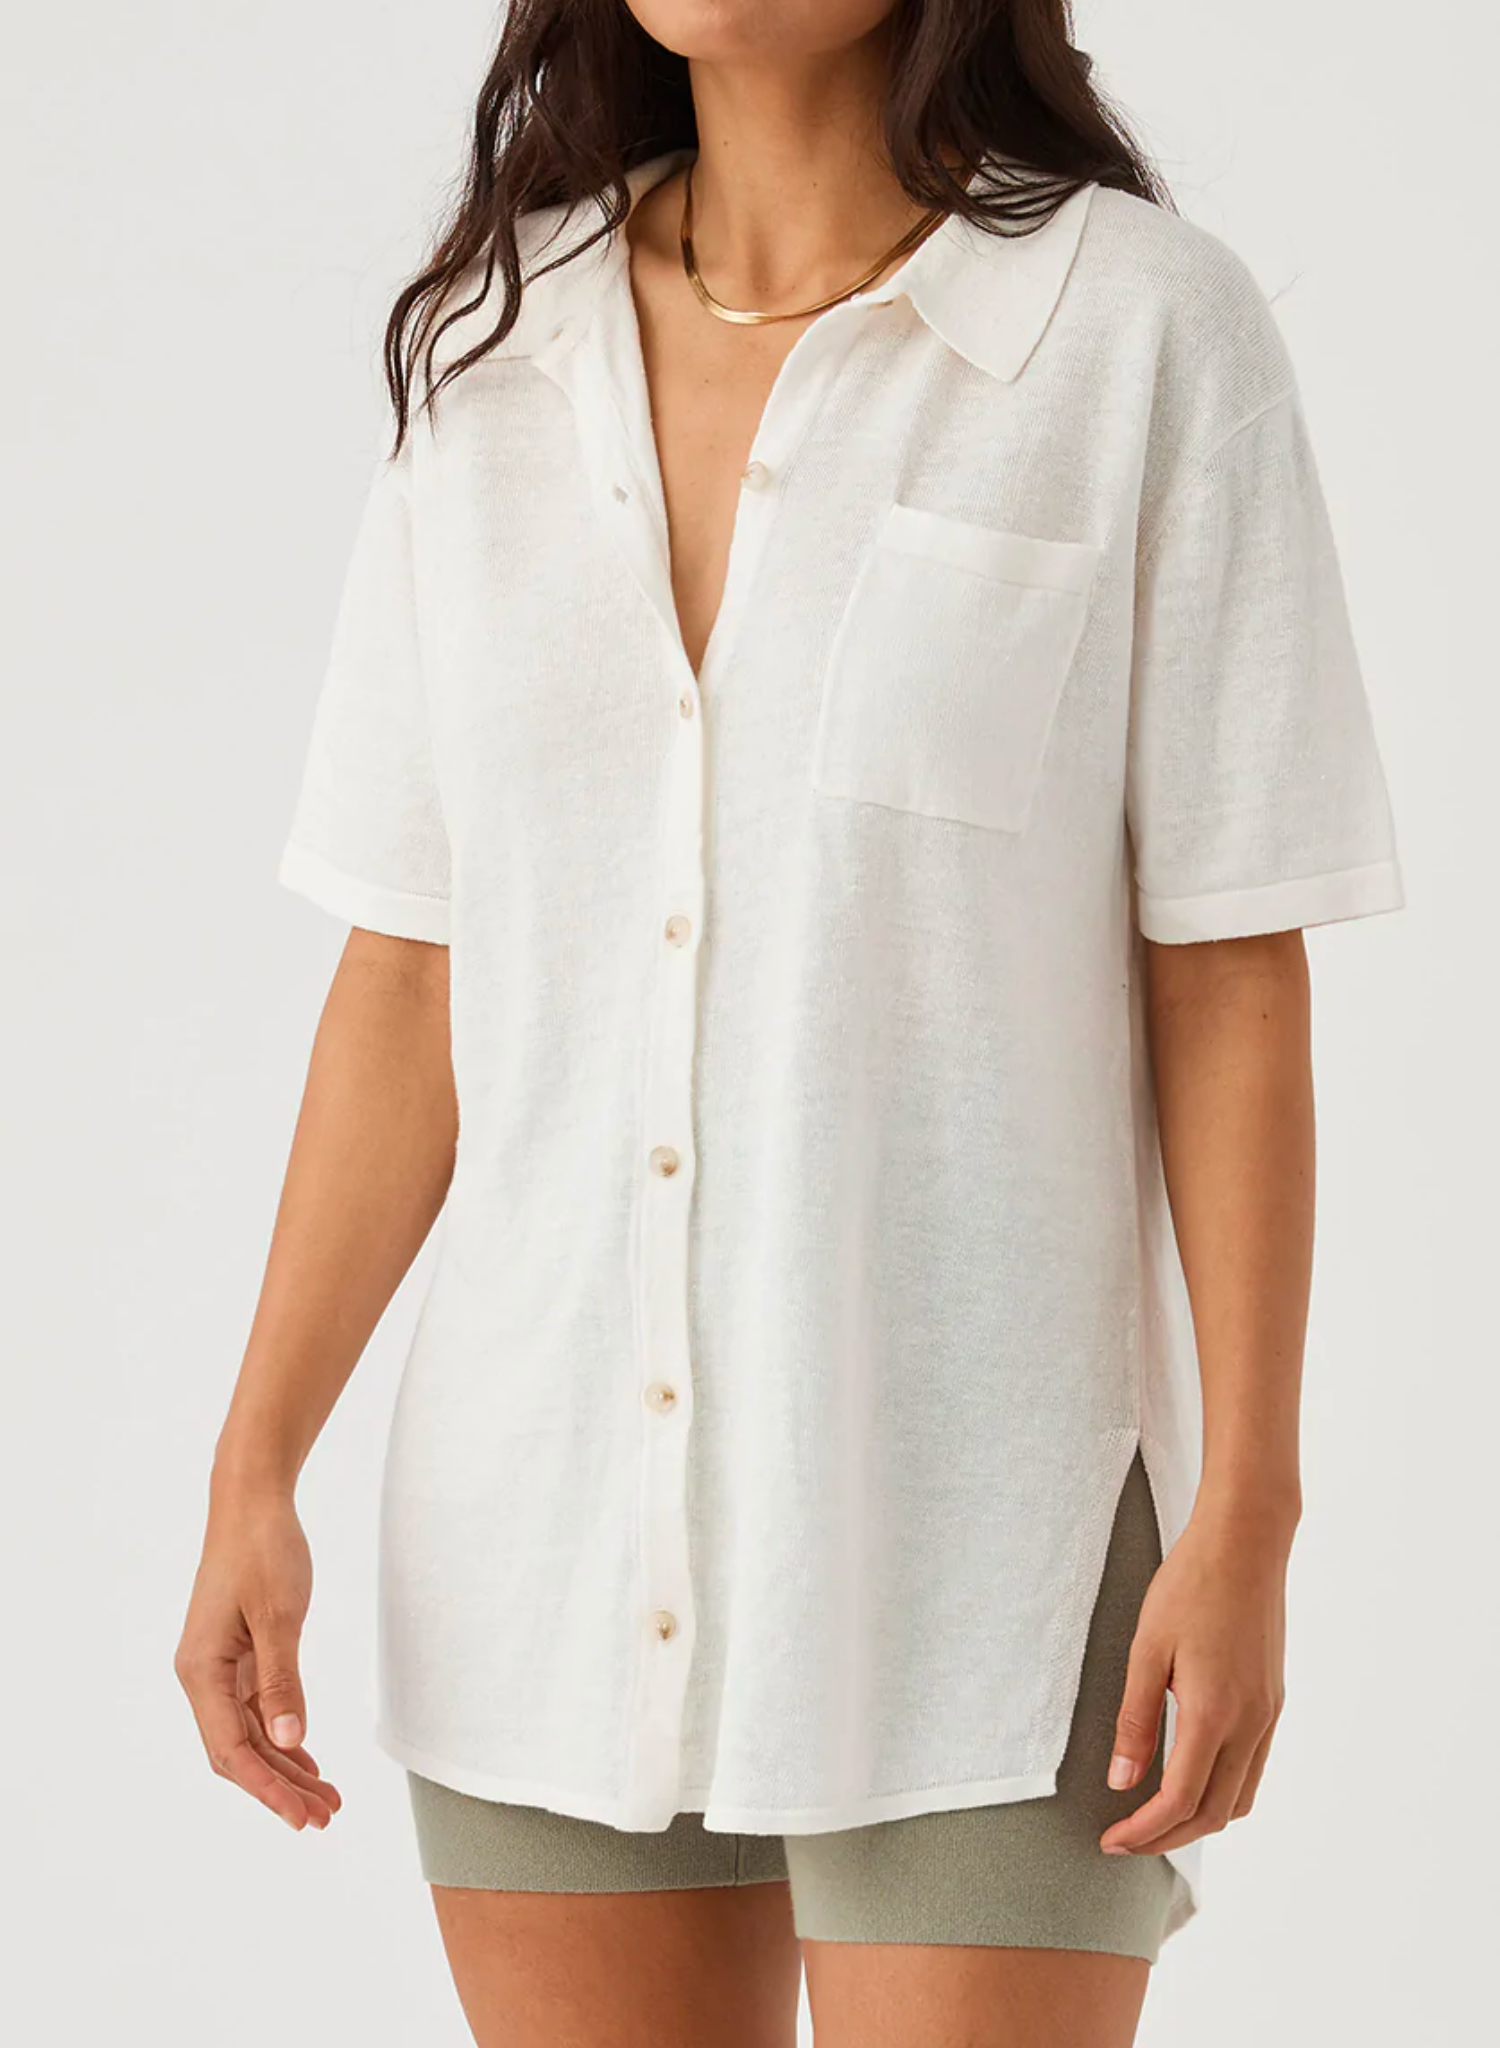 Brie Shirt in Cream. Button Down Front Front Pockets Short Sleeve Oversized Shirt Knitted Organic Linen Ethically produced Free of harmful chemicals: OEKO-TEX Standard 100 This piece is of 100% natural linen, carefully knitted with zero waste. With this is mind, this item appreciates good care so it can be enjoyed for seasons to come.